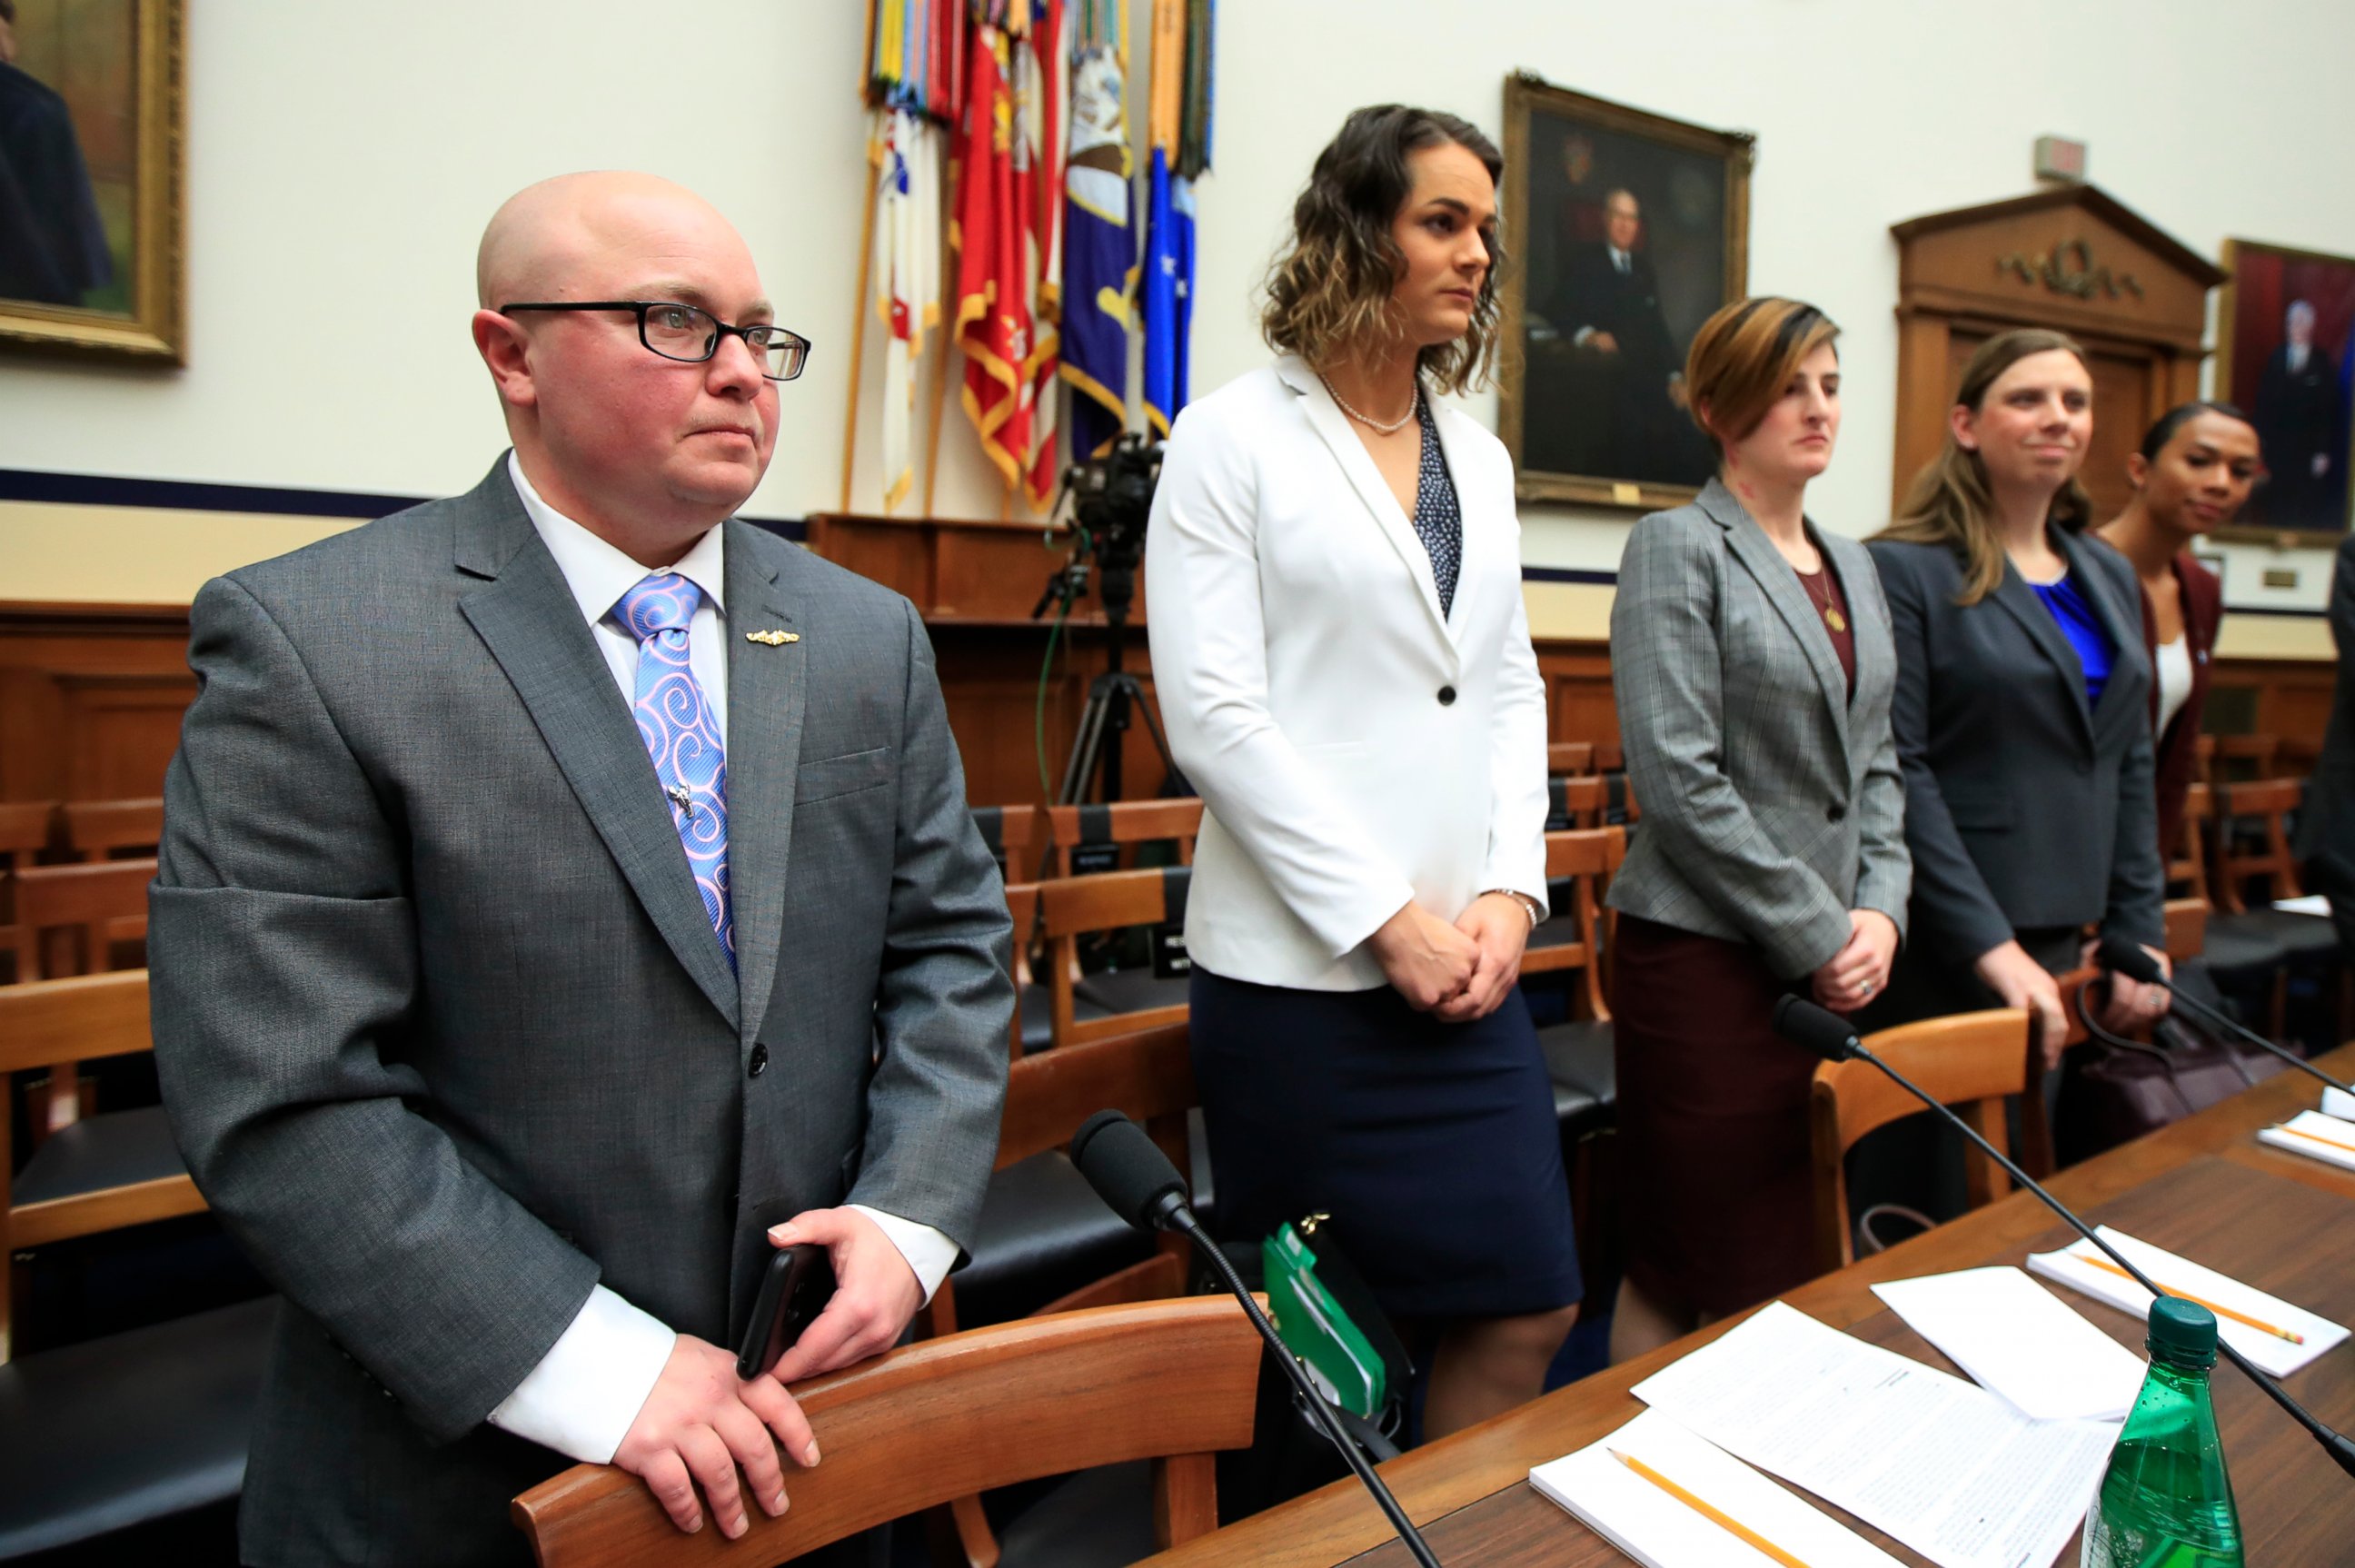 PHOTO: In this Feb. 27, 2019 photo, from left, transgender military members Navy Lt. Cmdr. Blake Dremann, Army Capt. Alivia Stehlik, Capt. Jennifer Peace, Staff Sgt. Patricia King and Navy Petty Officer Third Class Akira Wyatt.